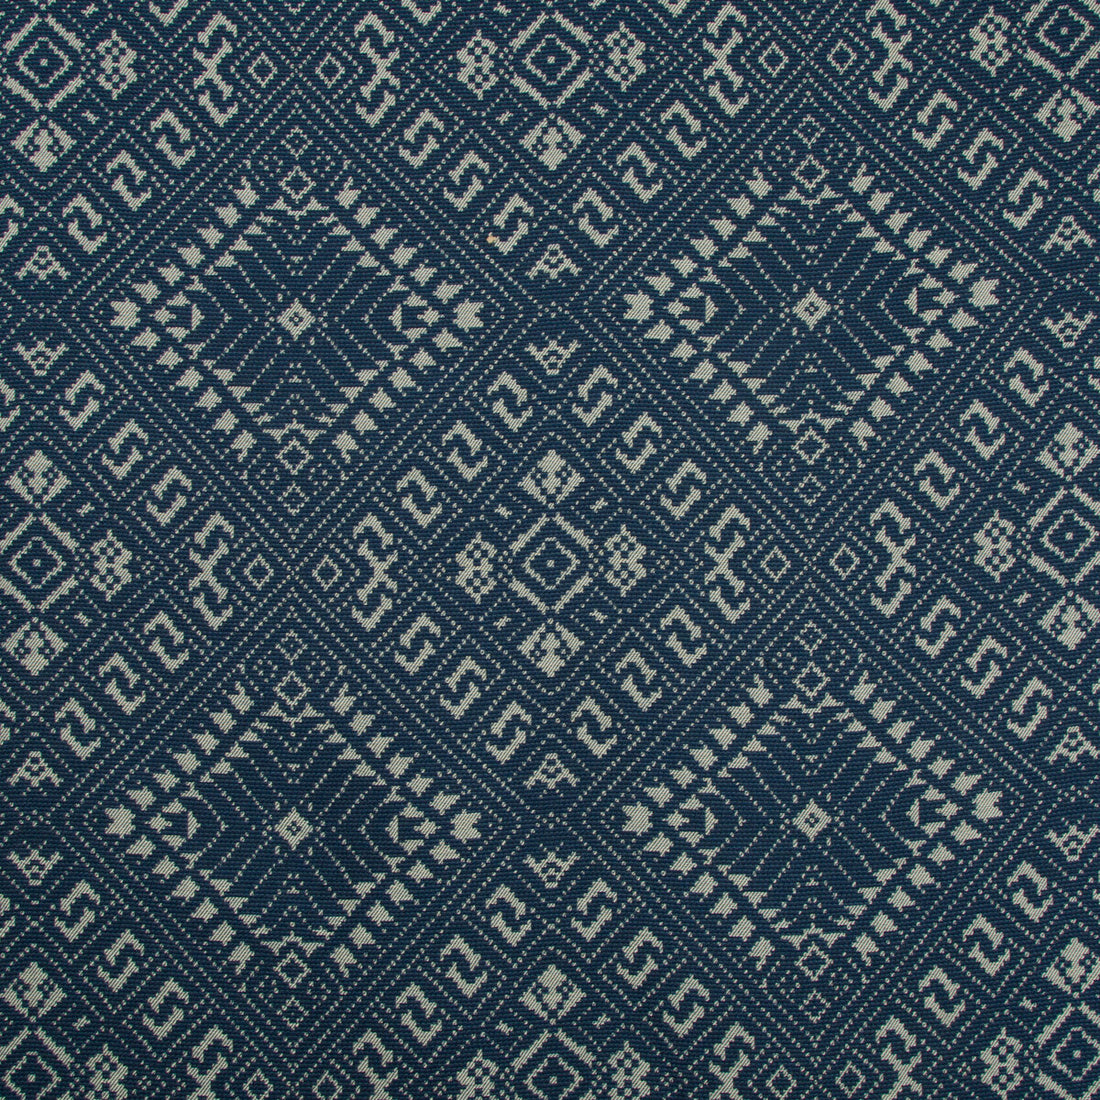 Penang fabric in indigo color - pattern 34875.50.0 - by Kravet Design in the Oceania Indoor Outdoor collection